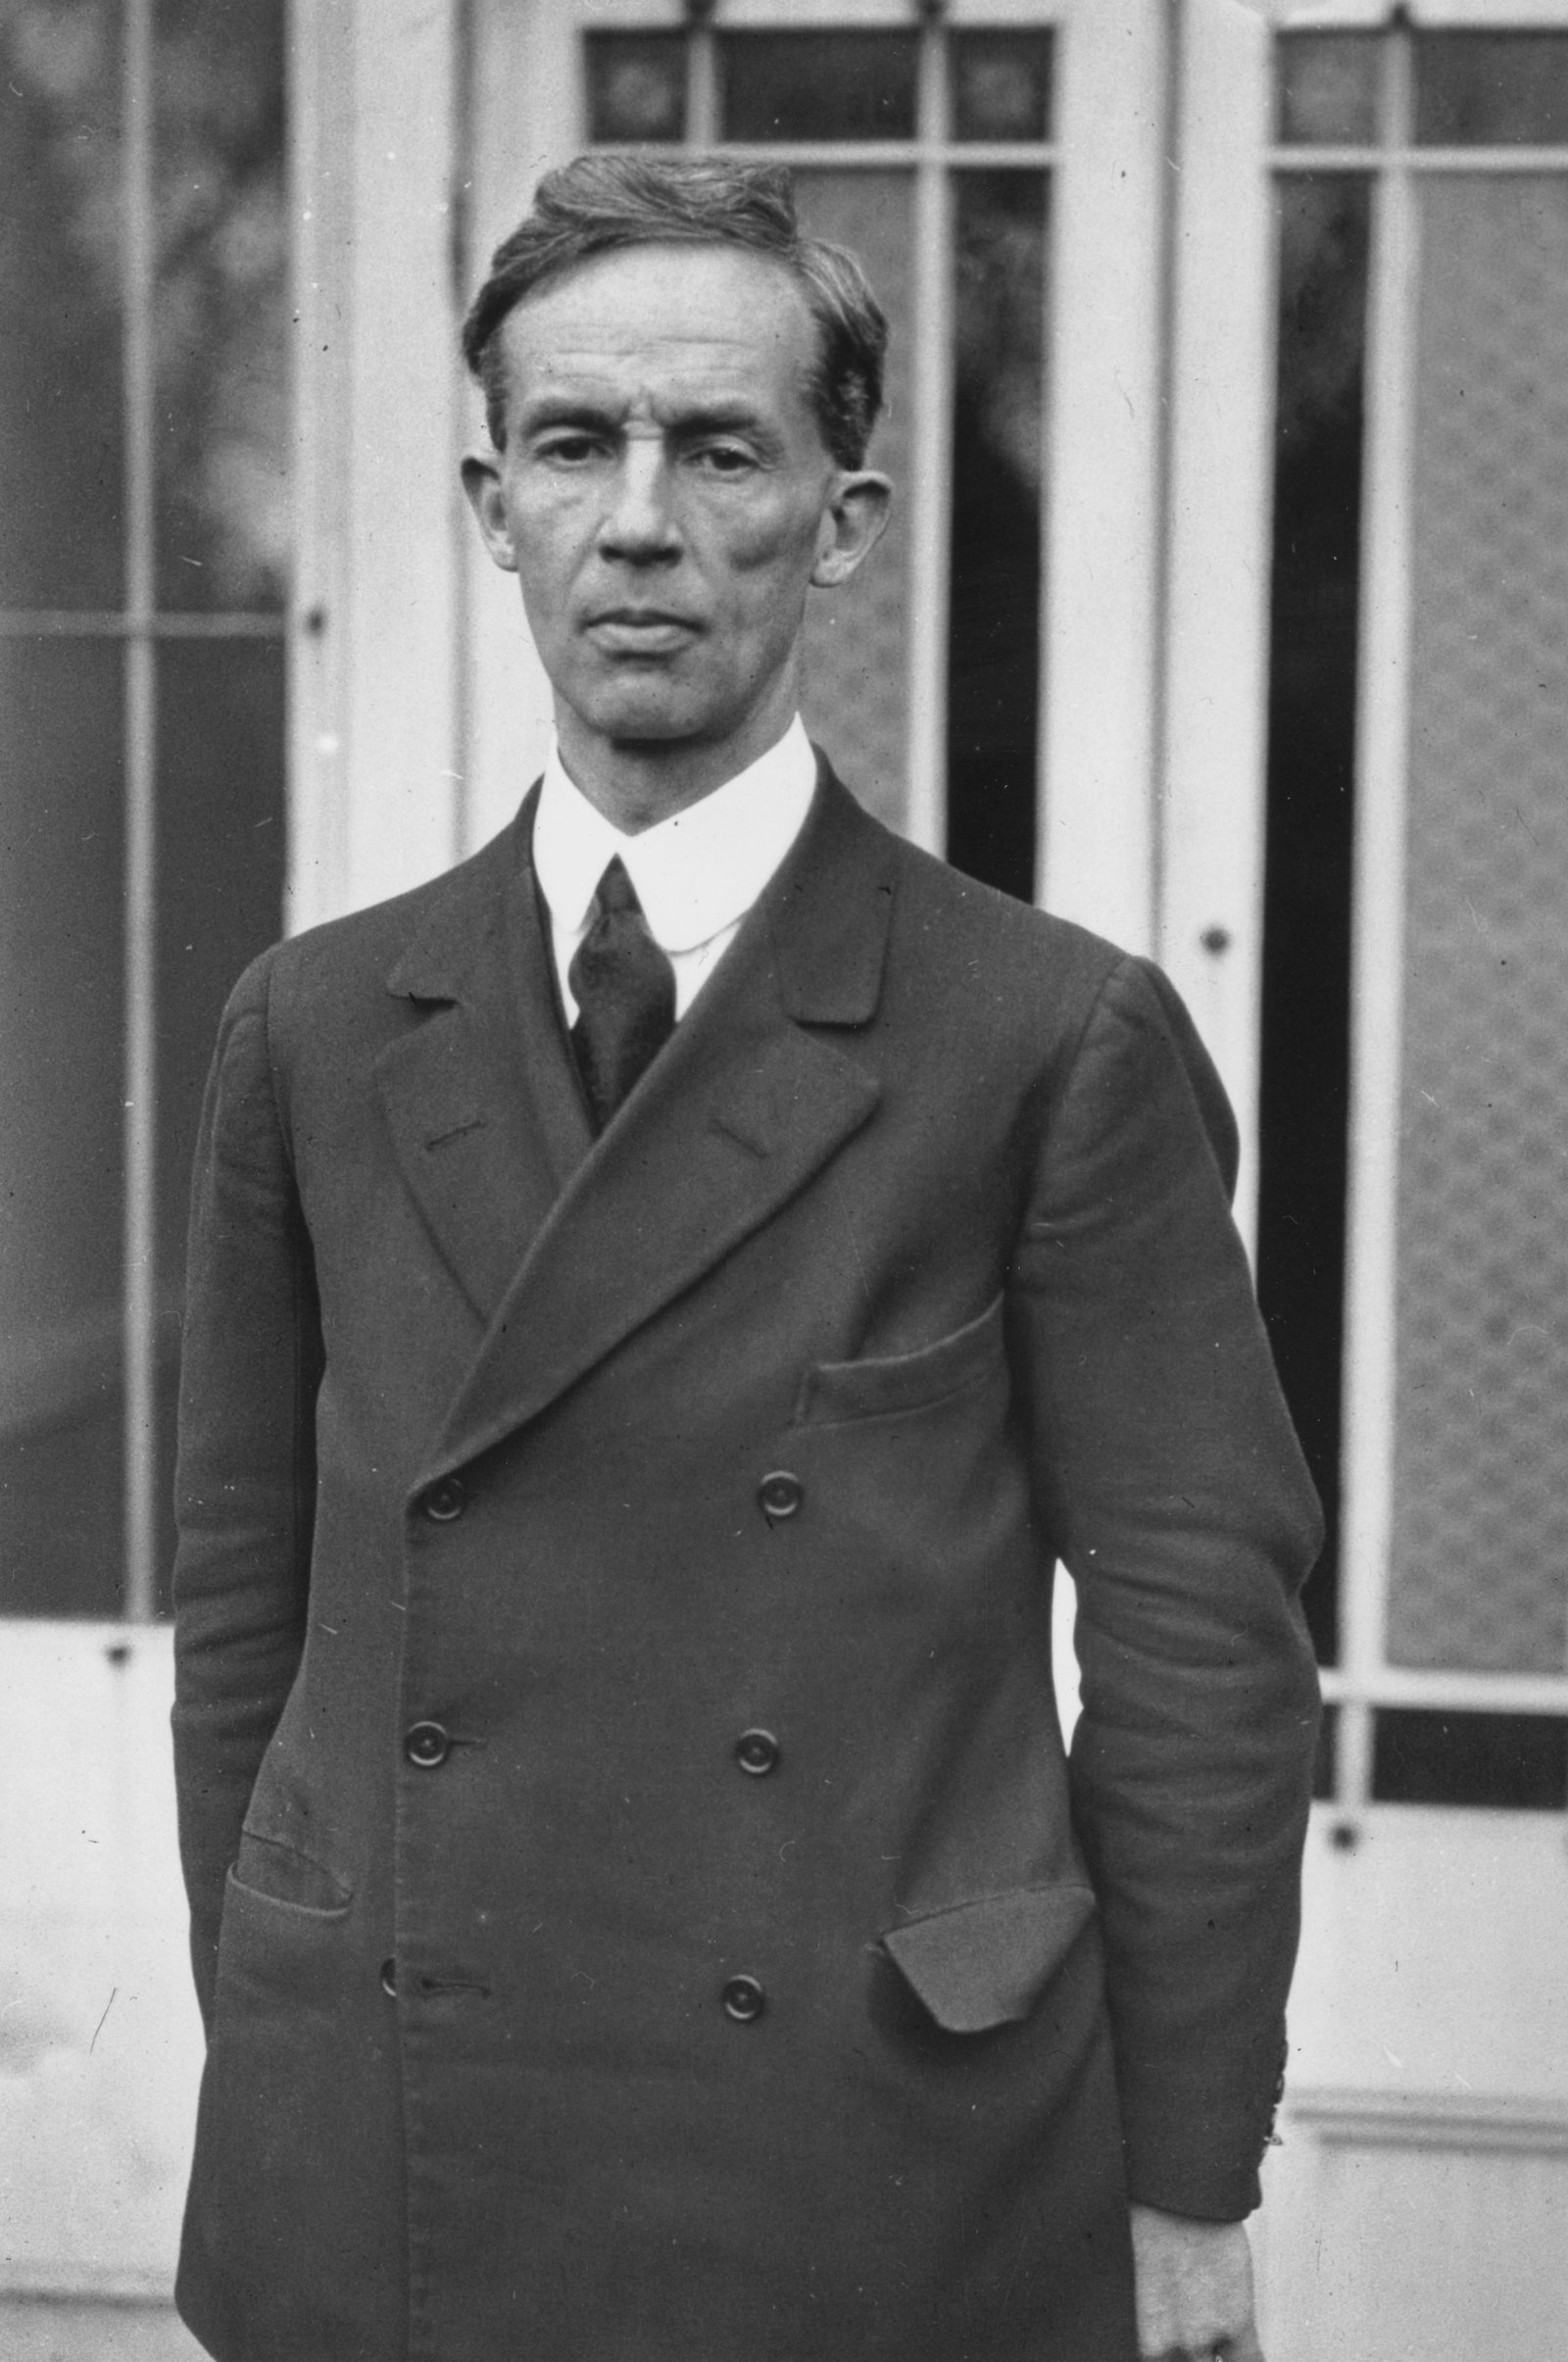 Image - Erskine Childers. Credit: Getty Images.